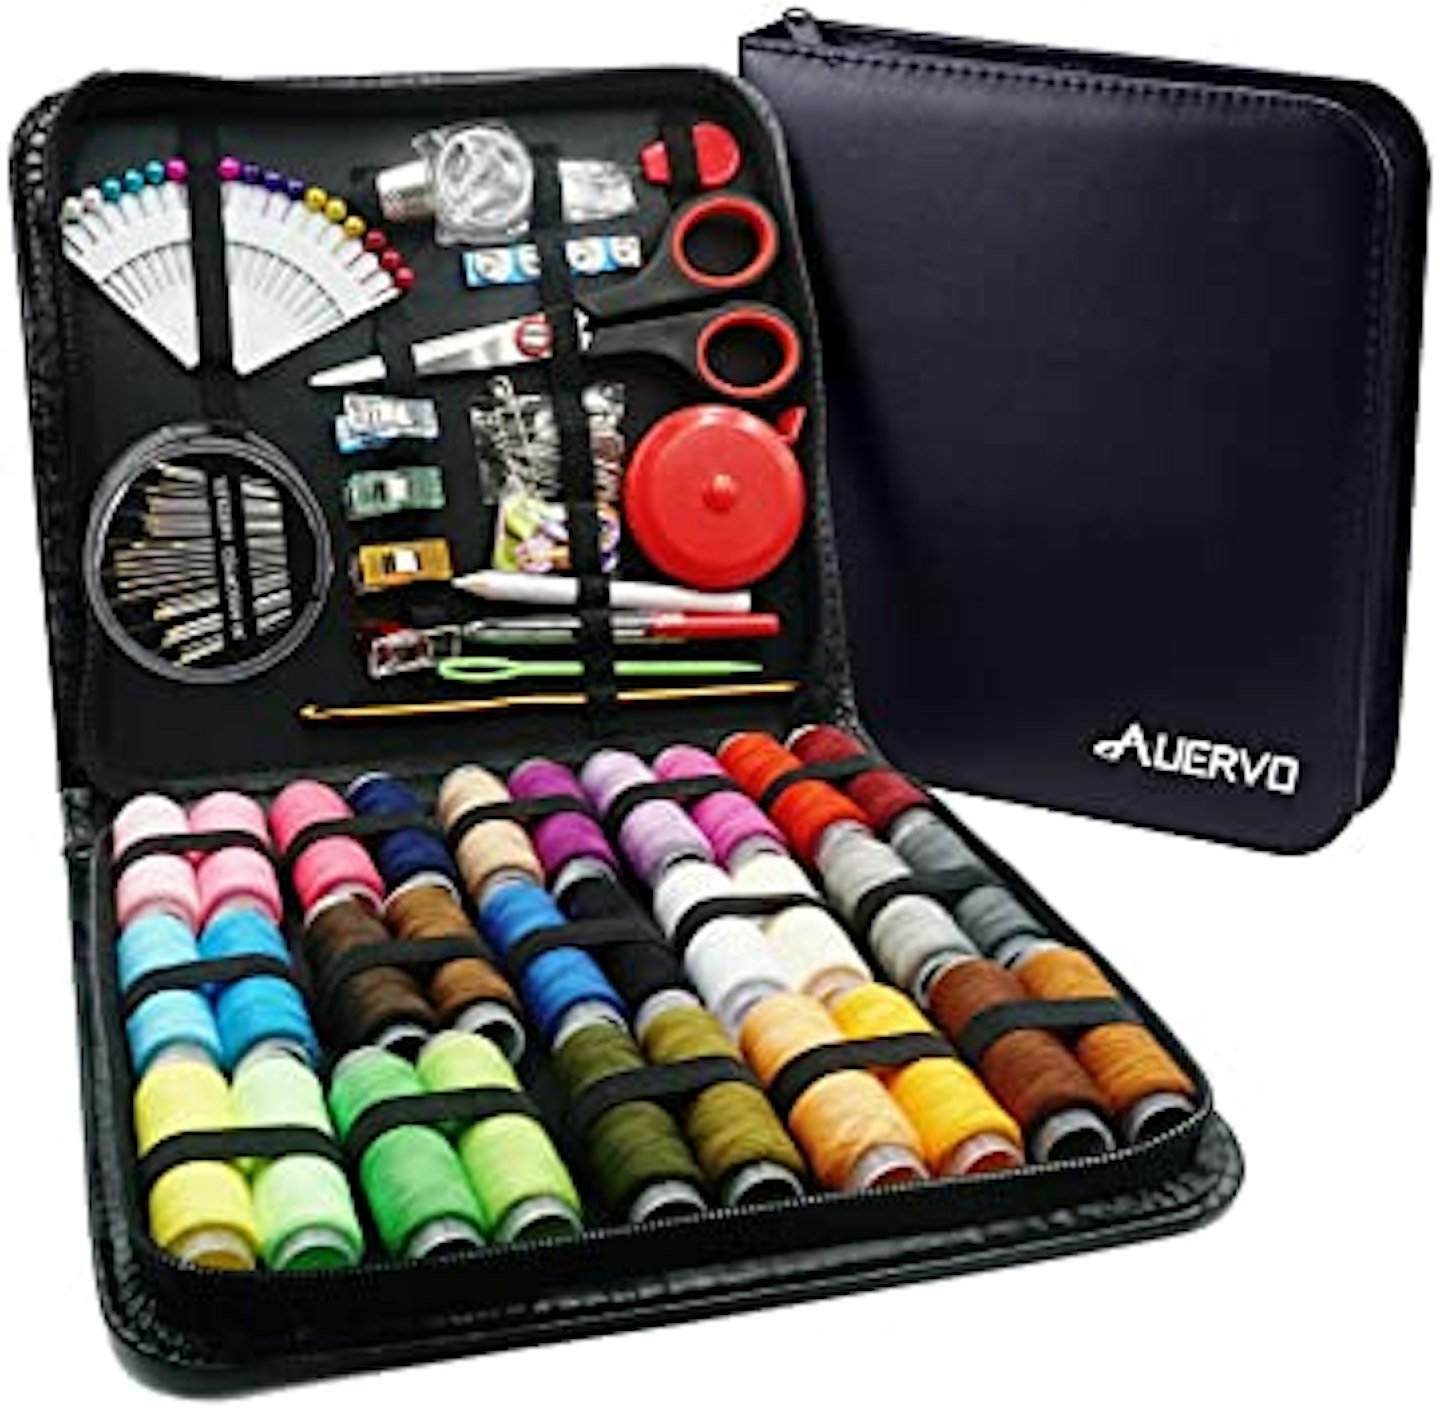 AUERVO, Sewing Kit, WAS £11.99 NOW £9.59